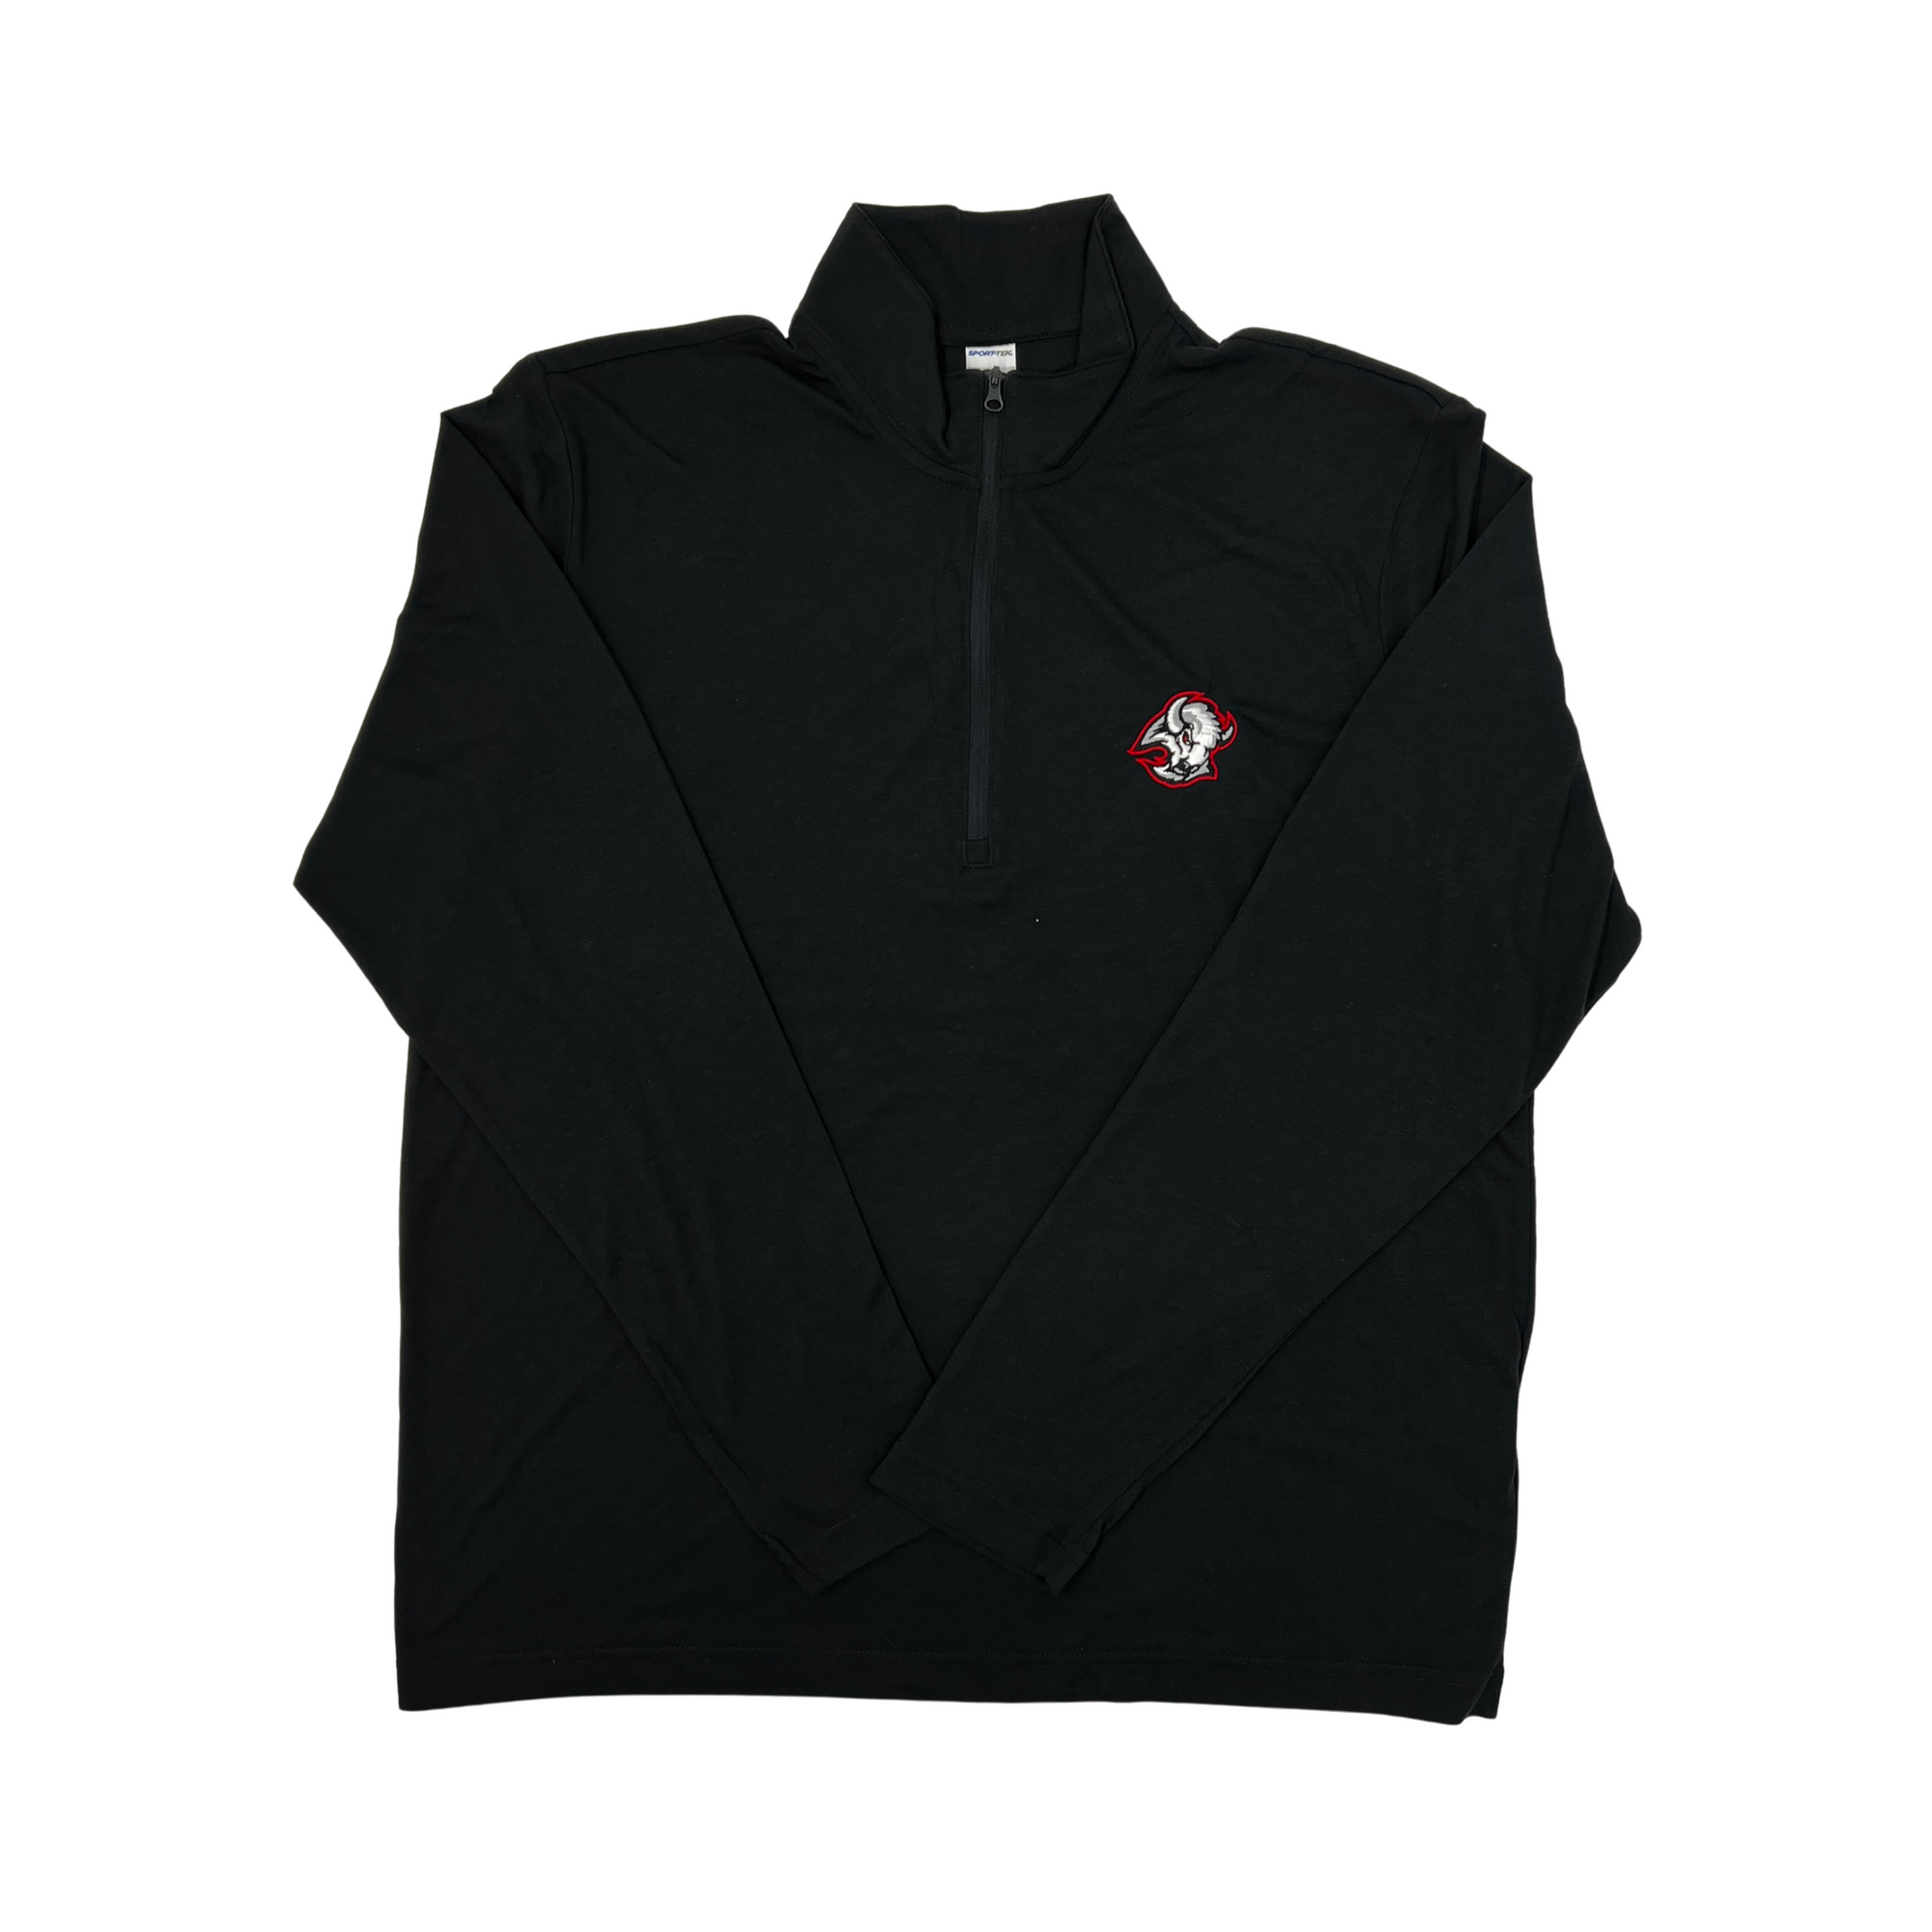 Buffalo Sabres Red and Black Goat Head Quarter Zip